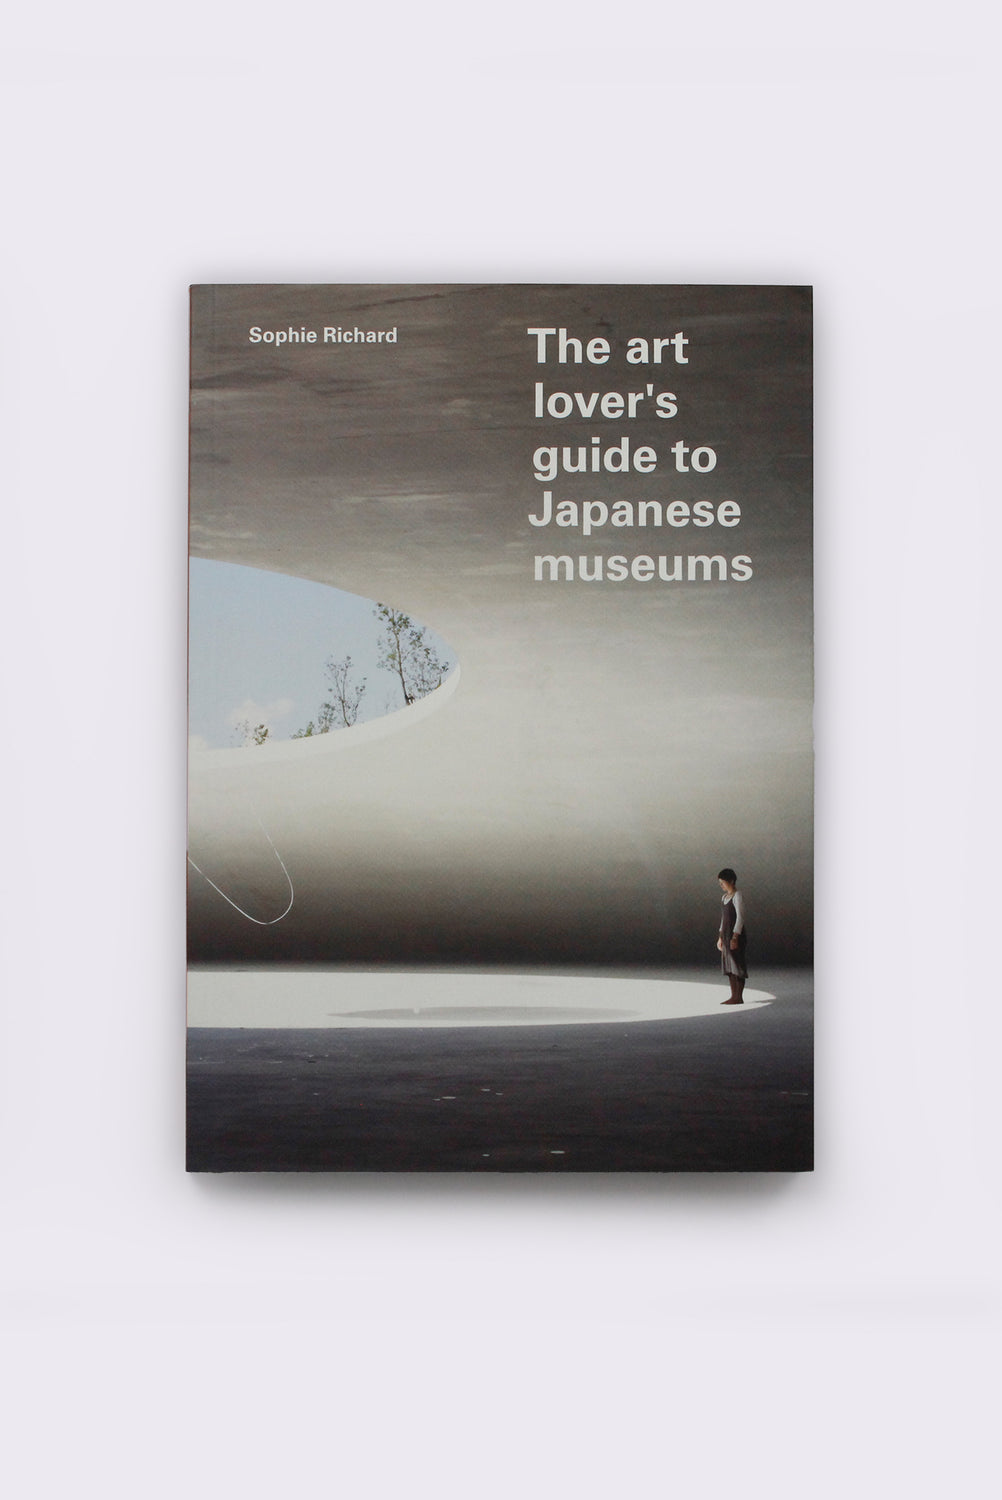 the art lover's guide to japanese museums, by sophie richard